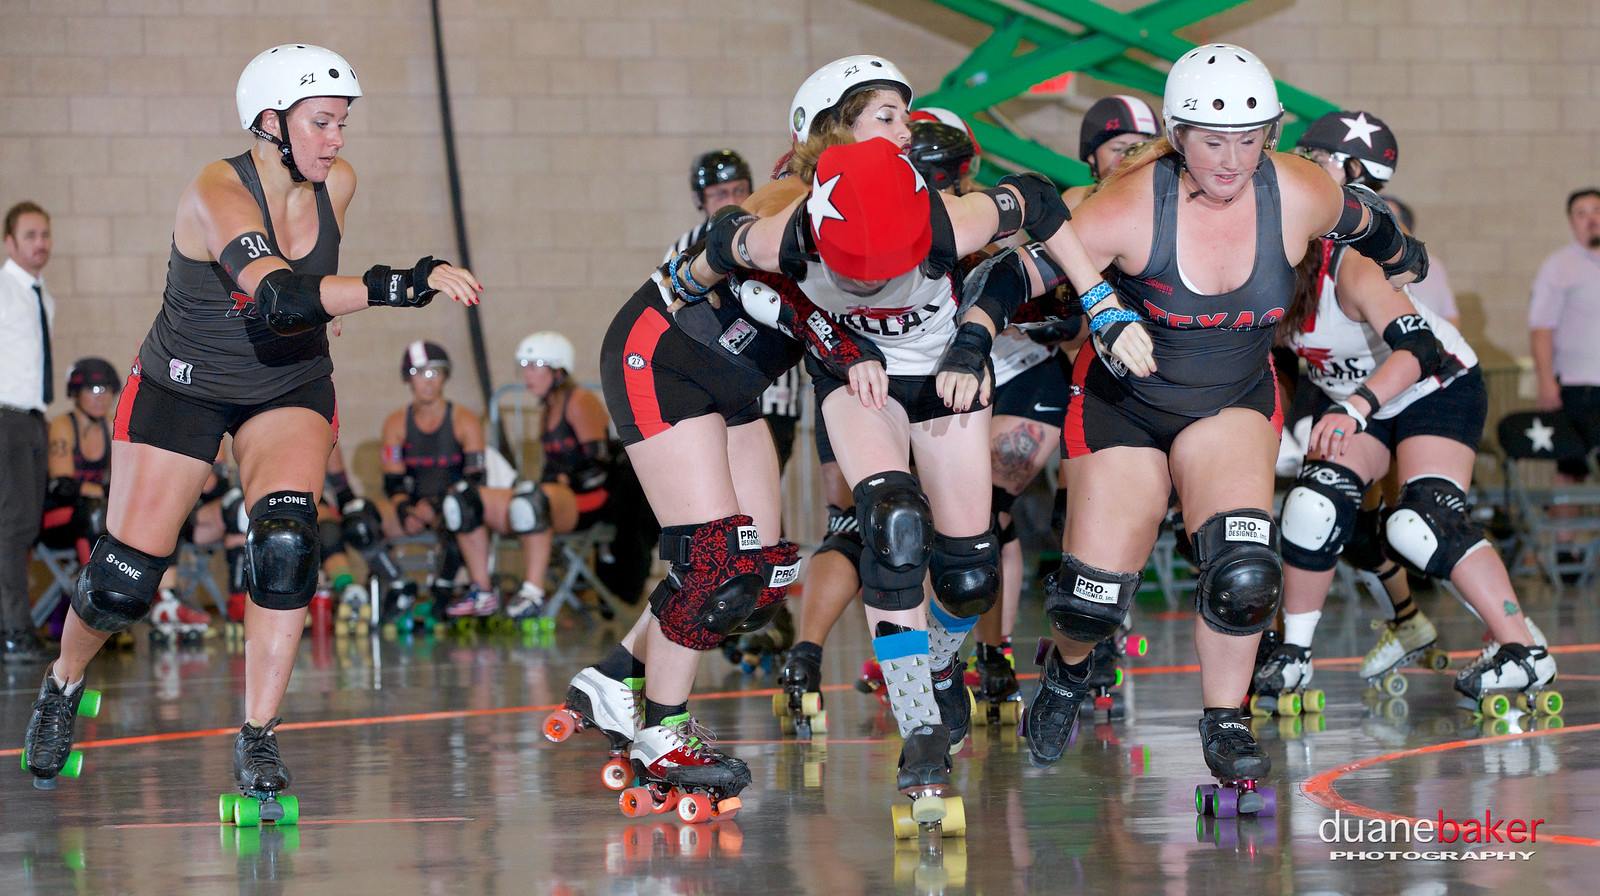  Dallas vs Texas Rollergirls - Photo by Duane Baker Photography 